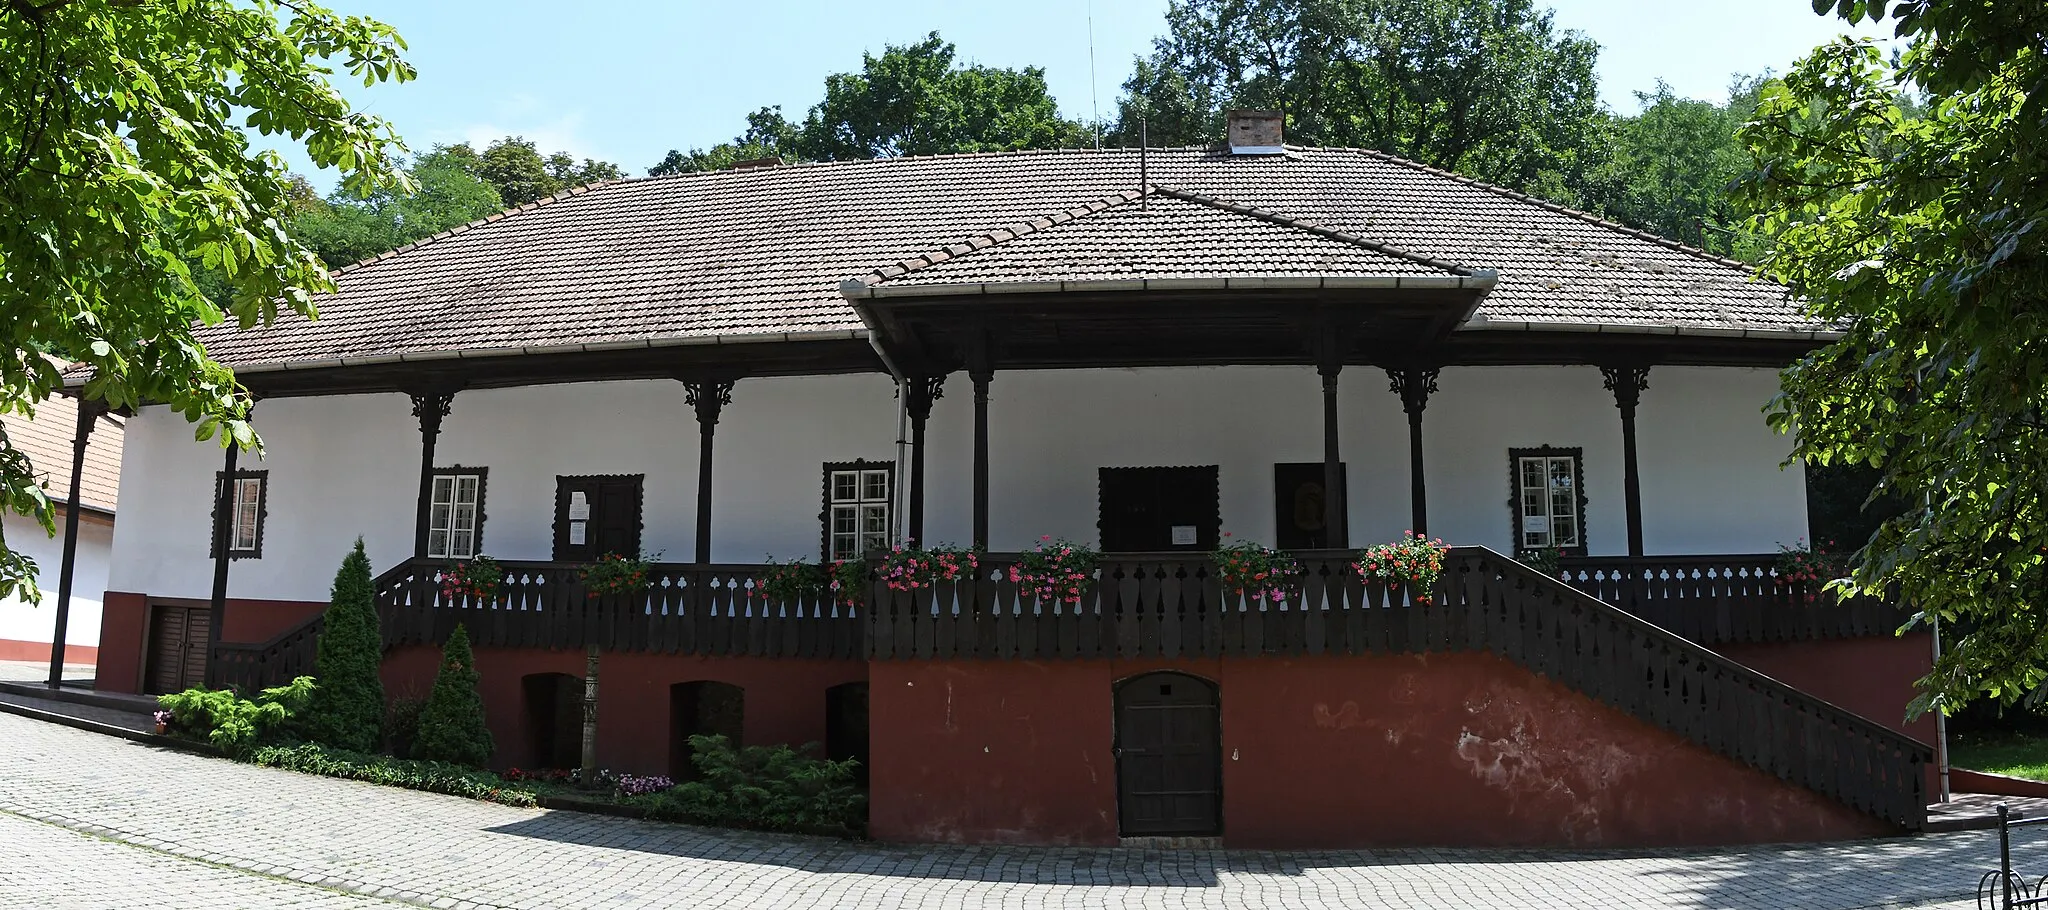 Photo showing: Former Kubinyi-Prónay mansion, today village hall and other offices in Ságújfalu, Hungary